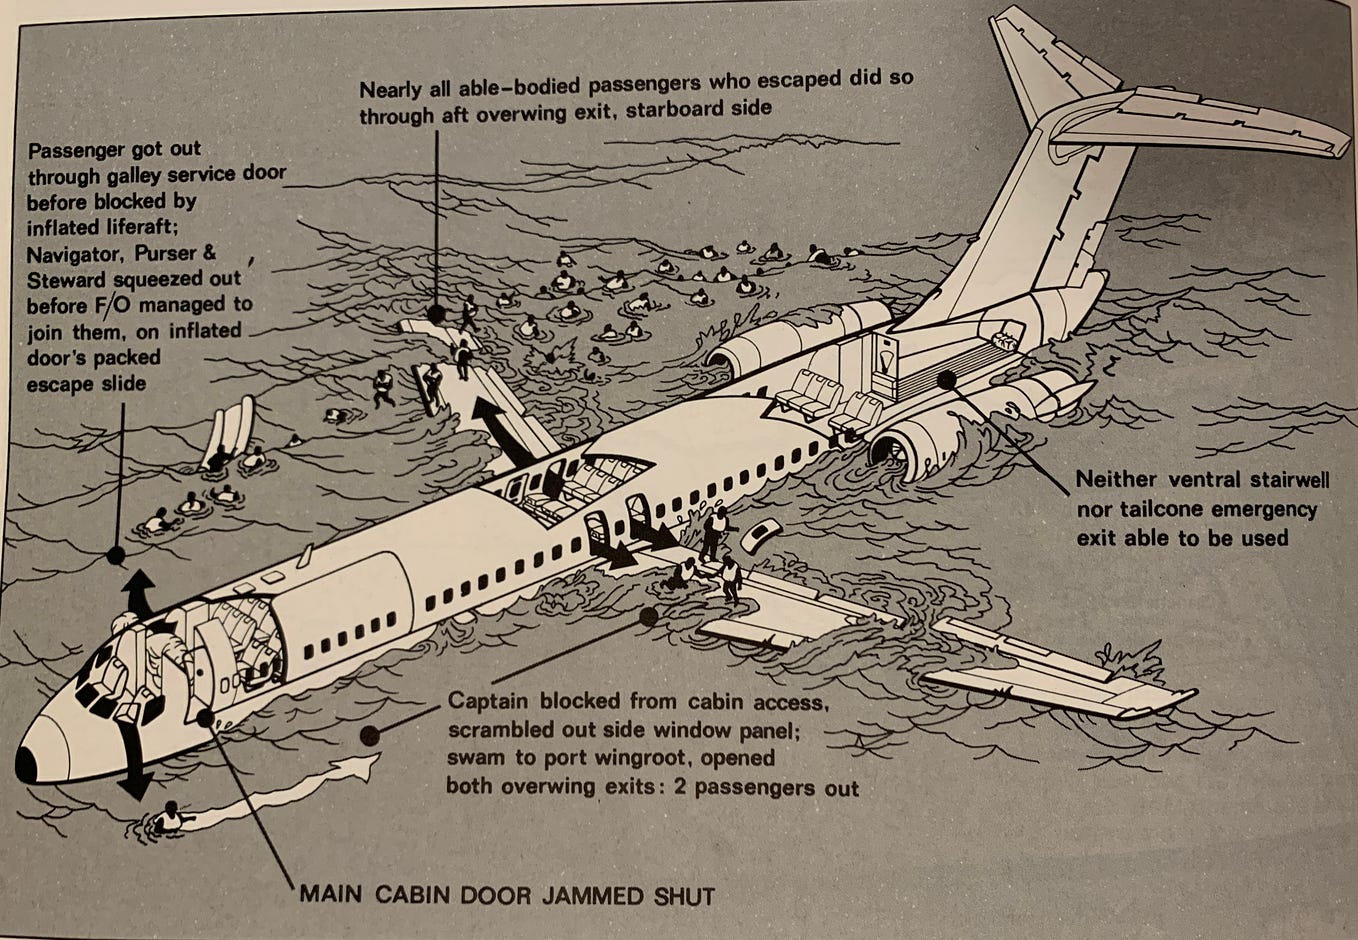 Down in Deep Water: The ditching of ALM Antillean Airlines flight 980